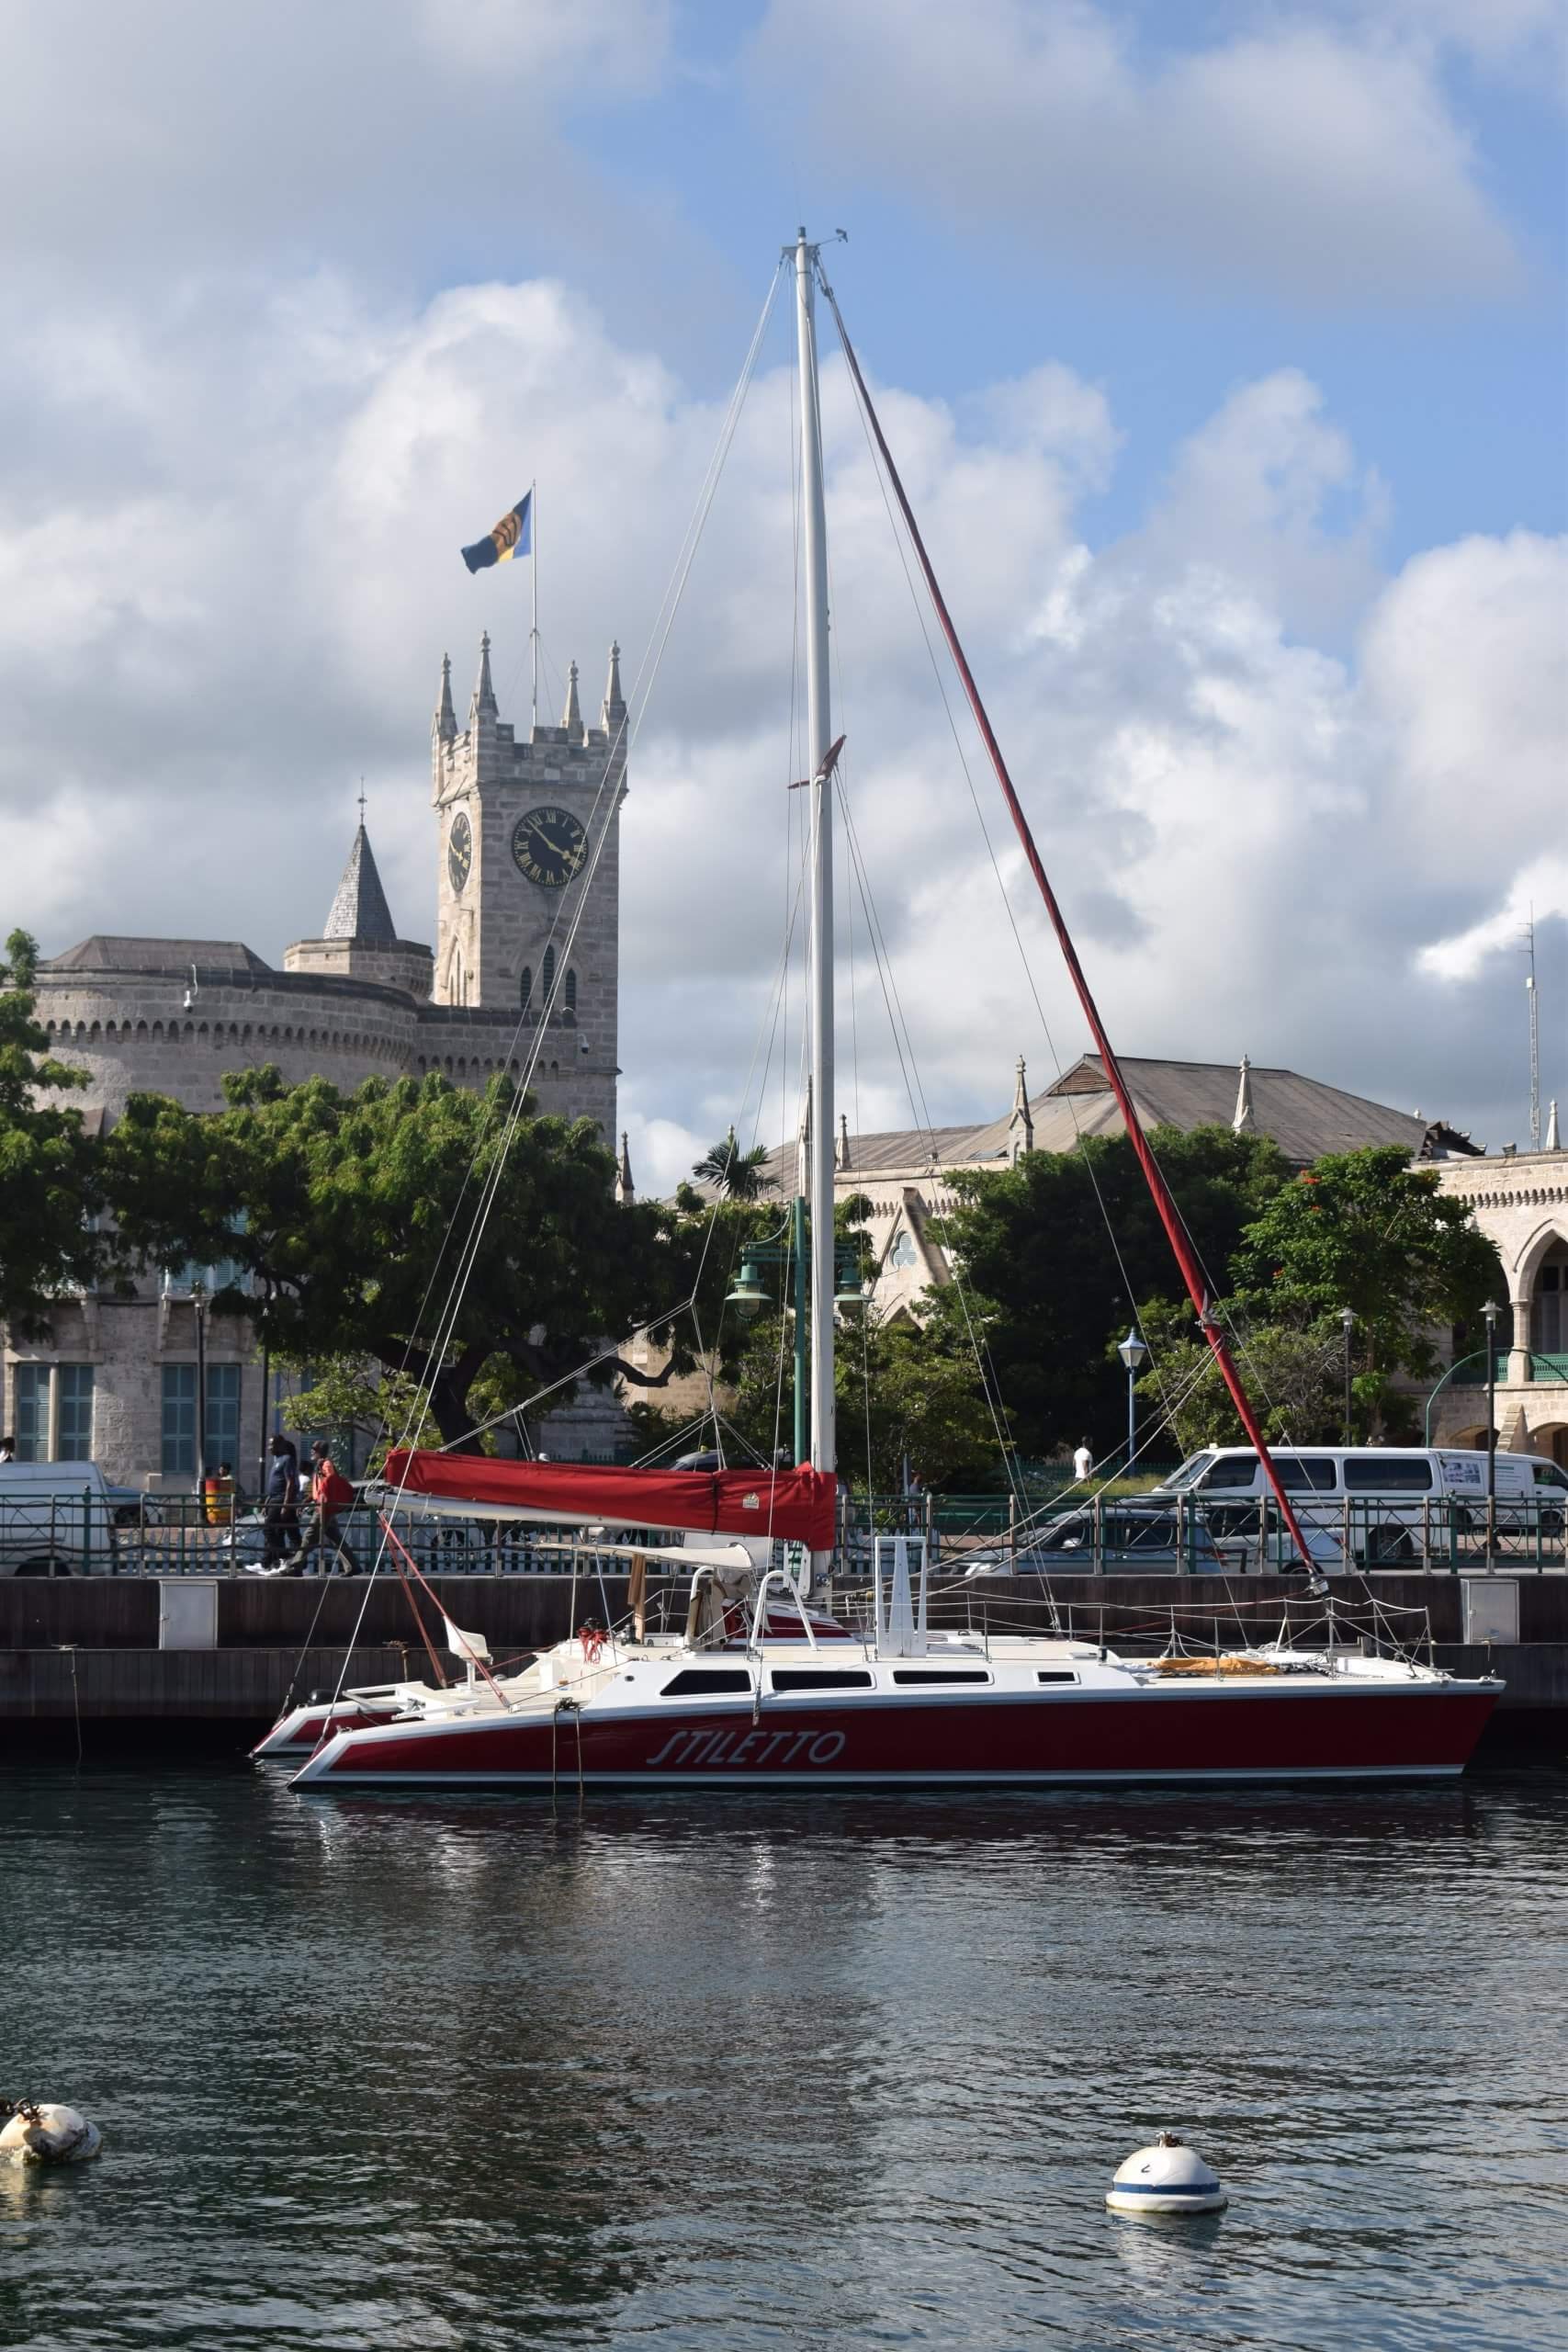 A yacht in Bridgetown Harbour with Parliament Buildings in the background